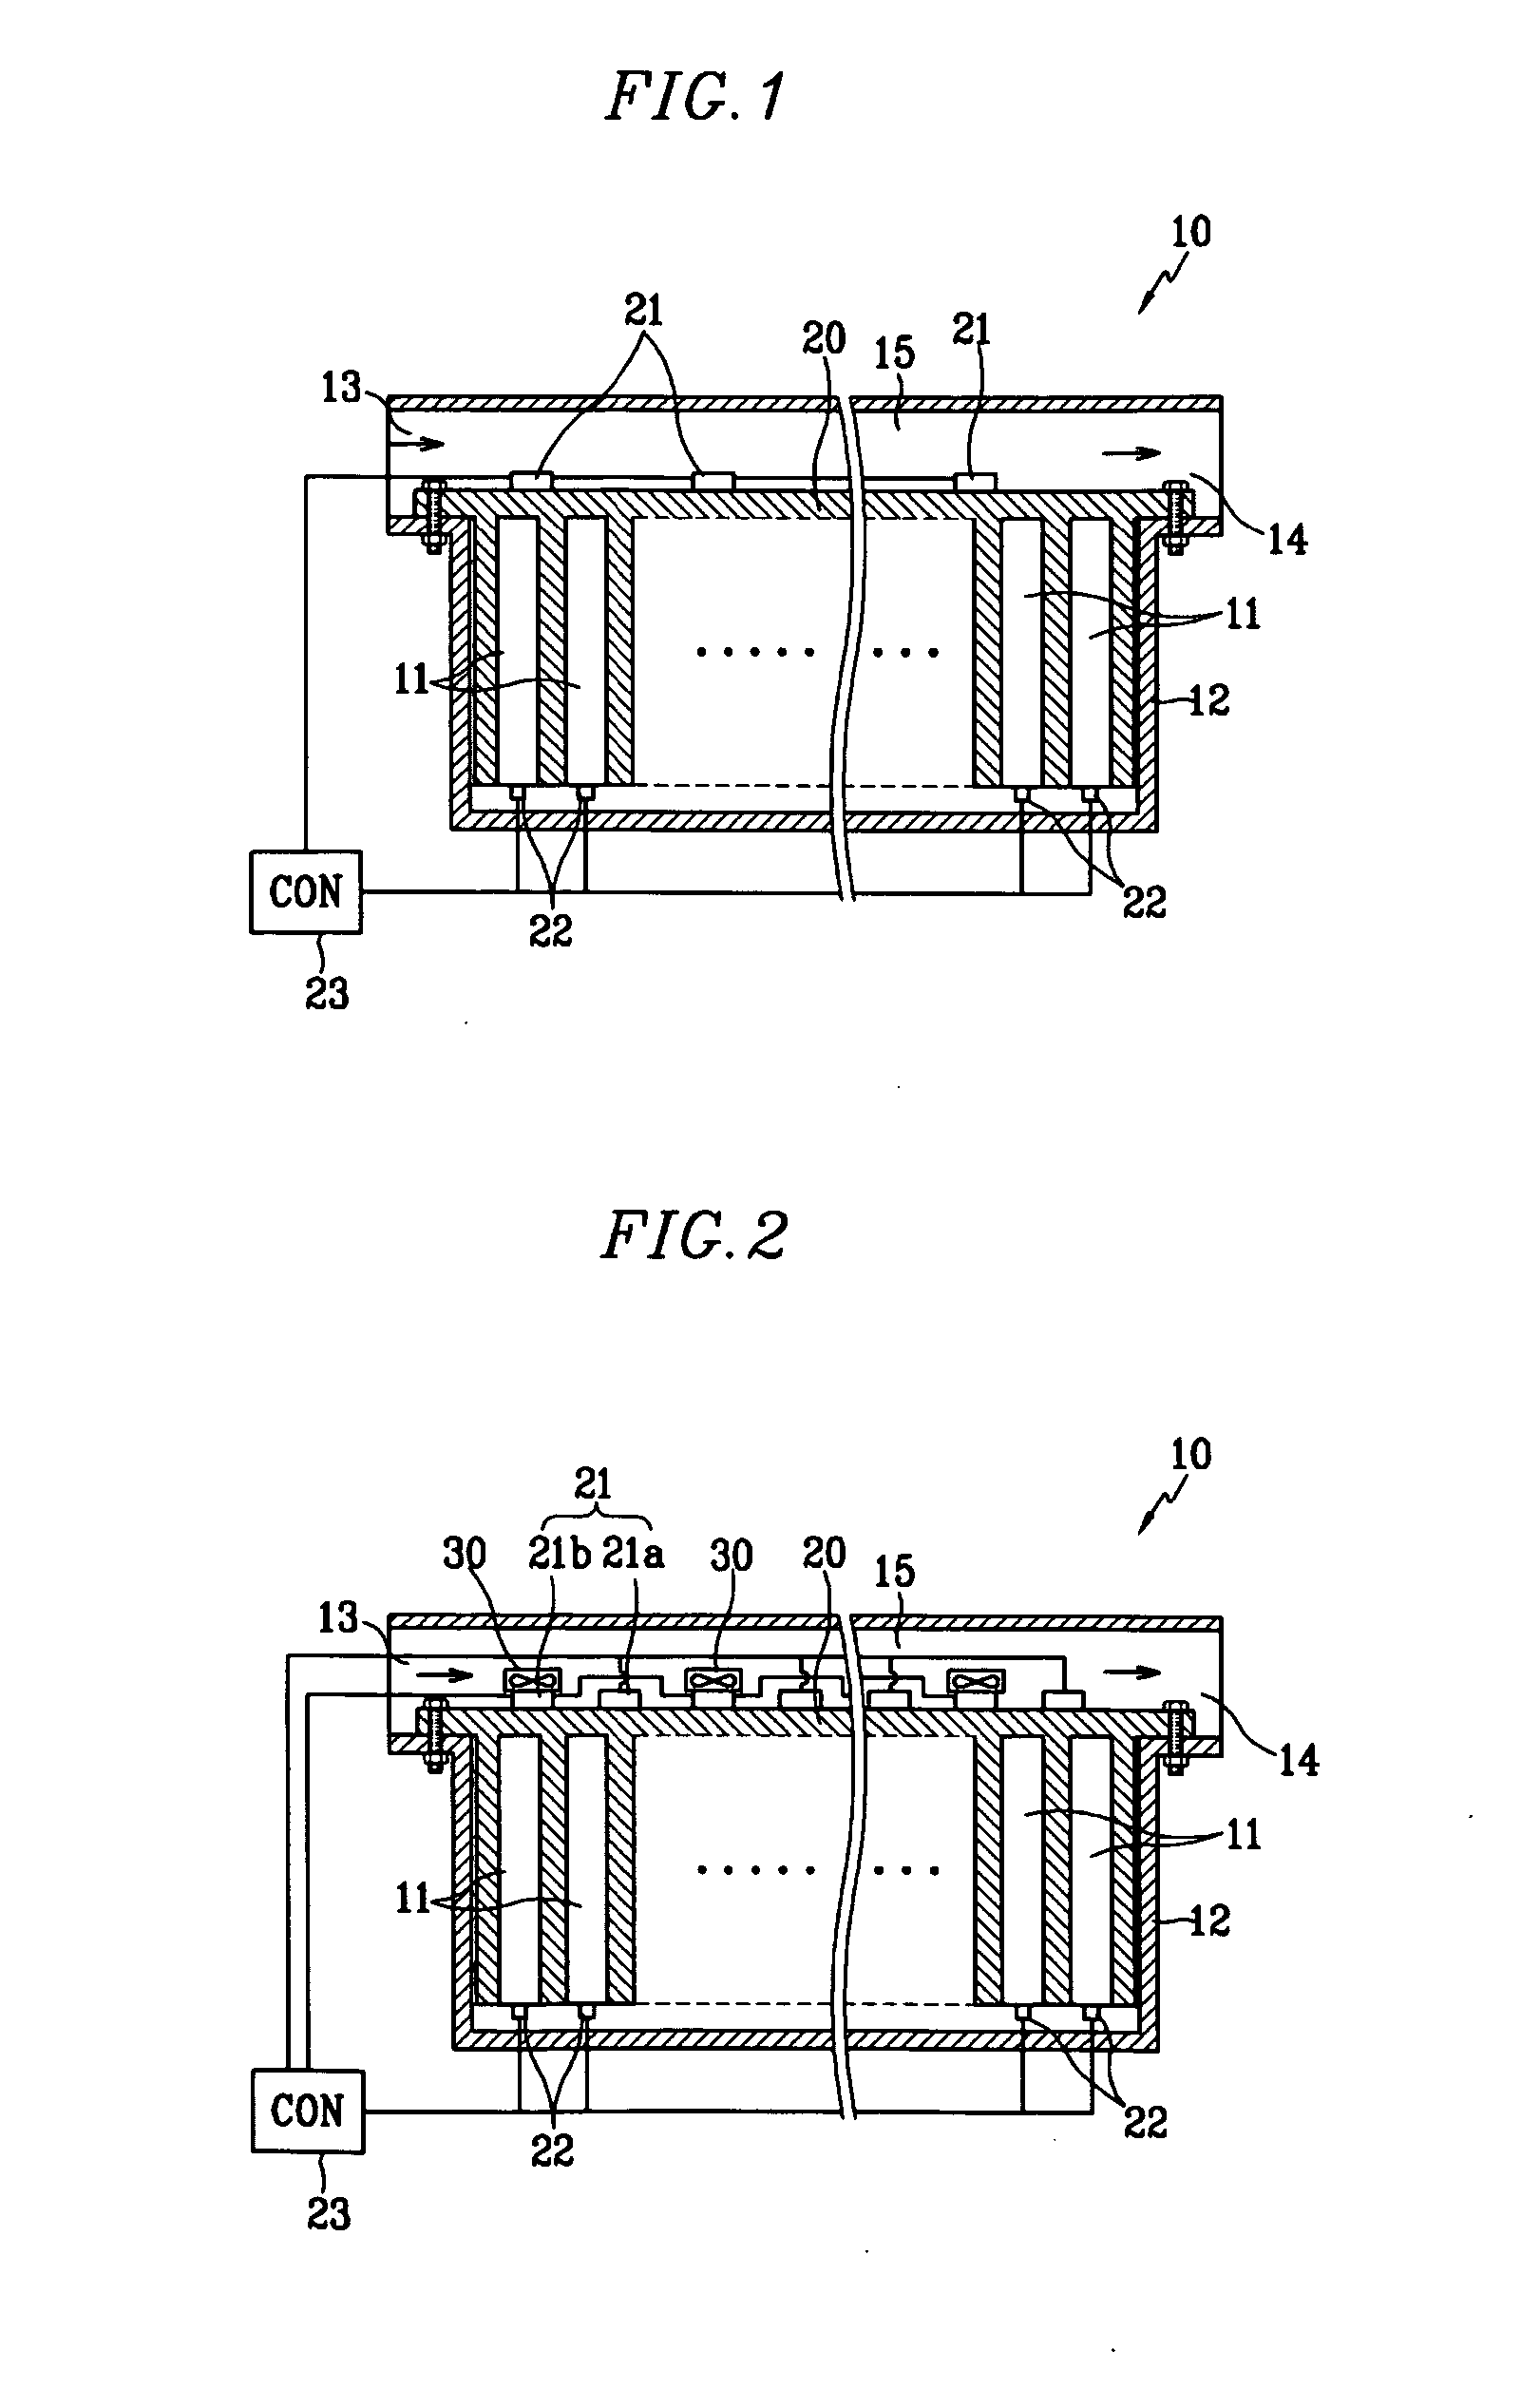 System for controlling temperature of a secondary battery module